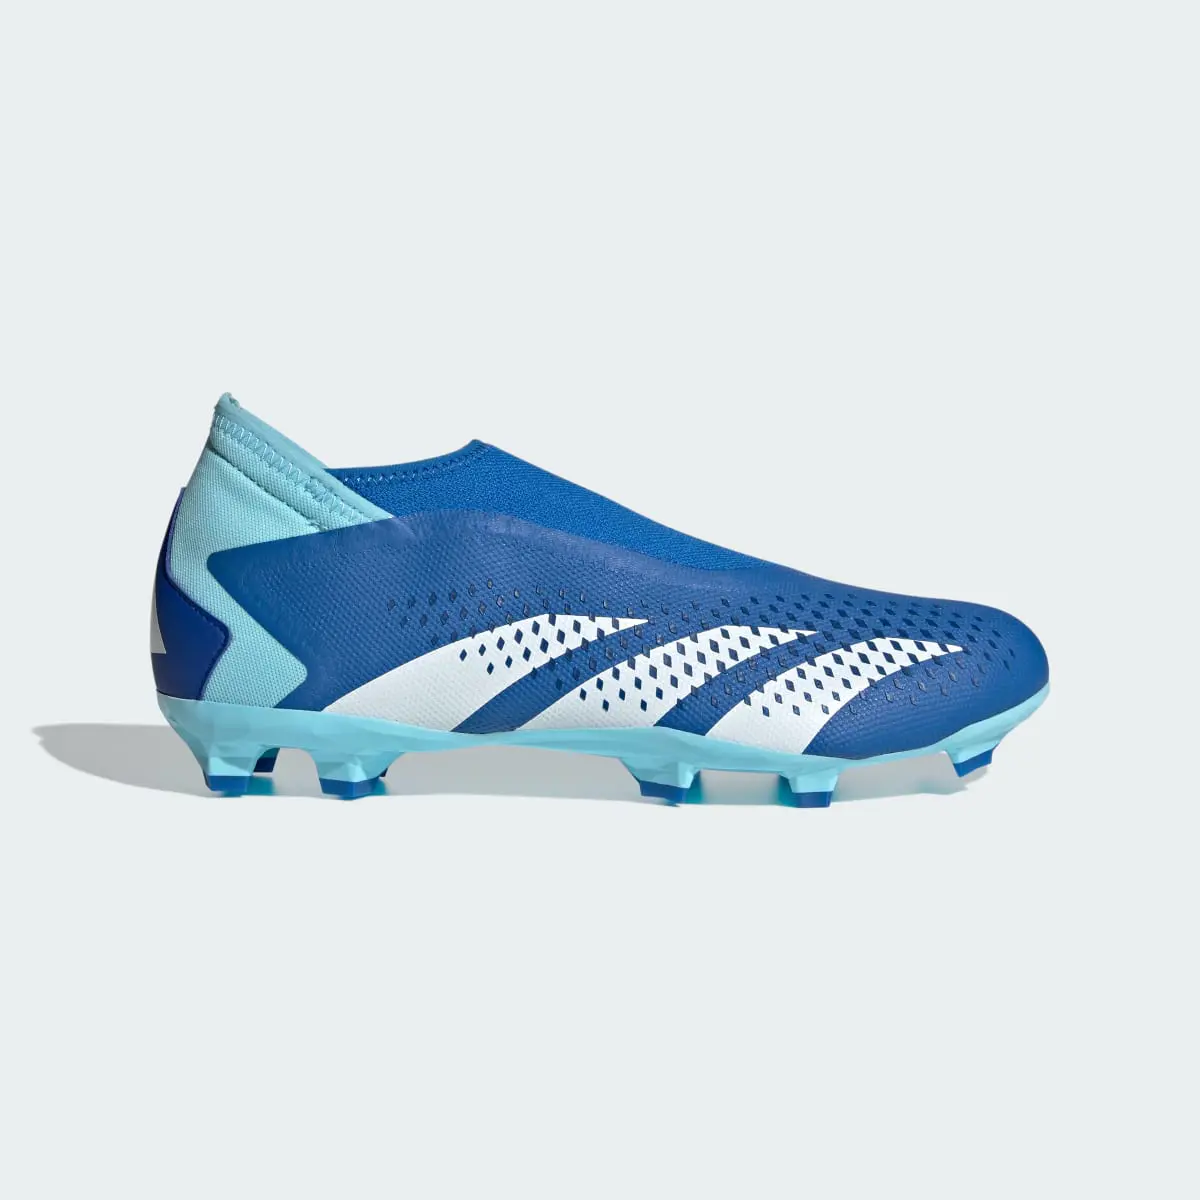 Adidas Predator Accuracy.3 Laceless Firm Ground Cleats. 2